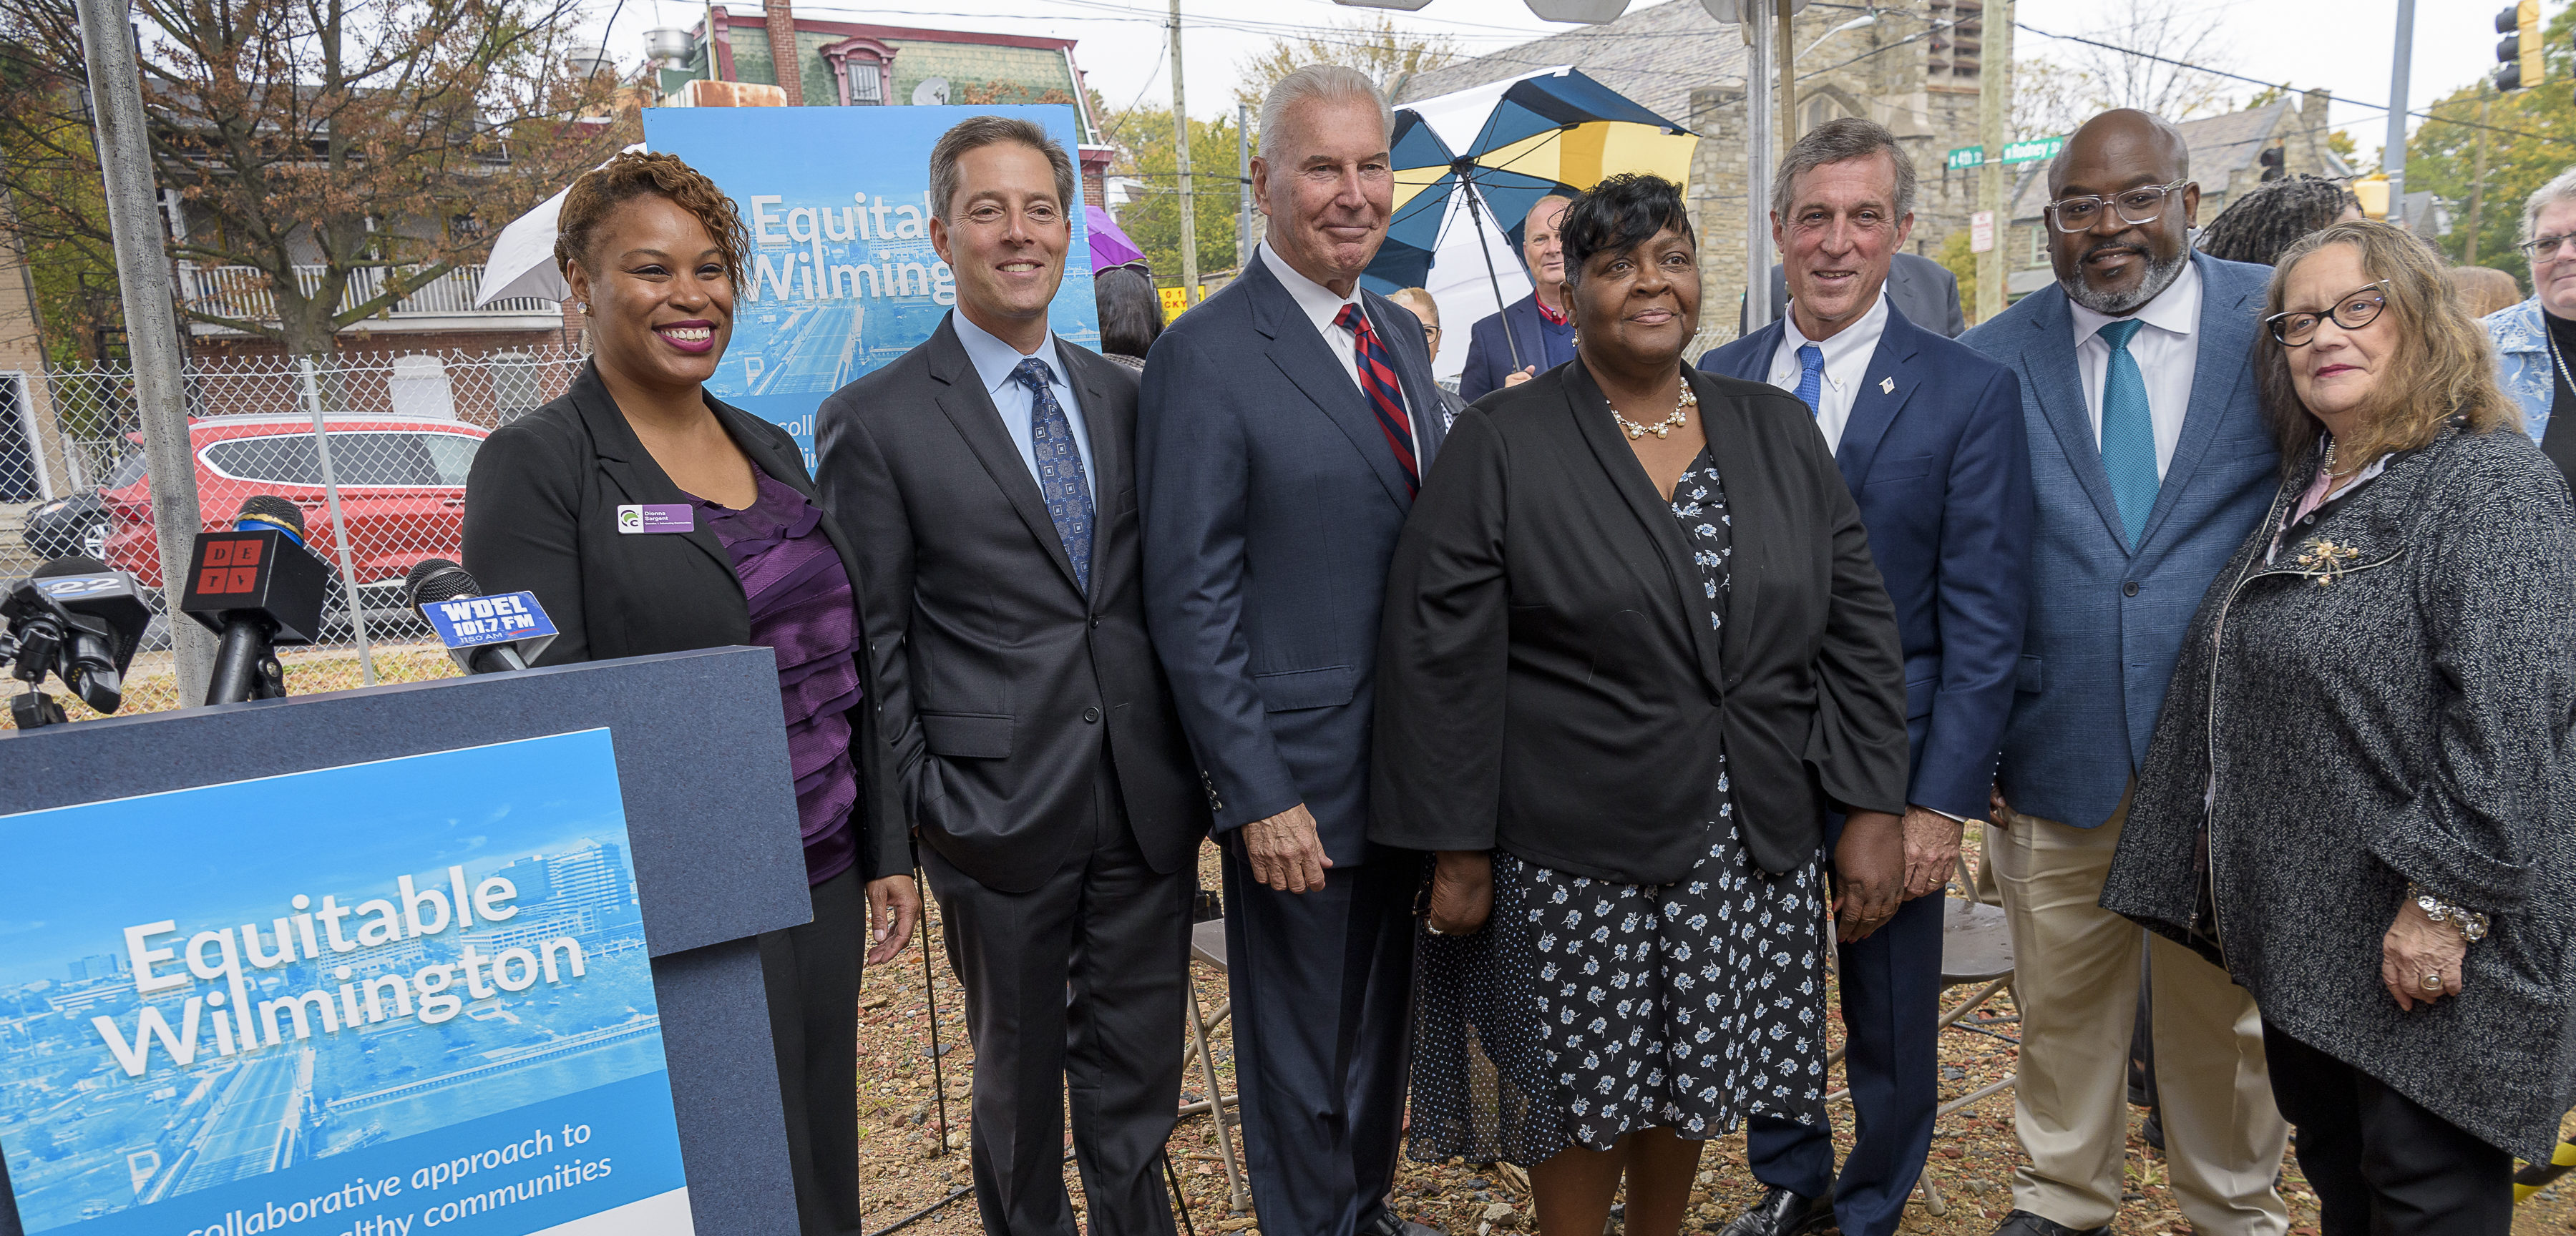 JPMorgan Chase Makes $4 Million Investment to  Promote Inclusive Growth in Wilmington Neighborhoods